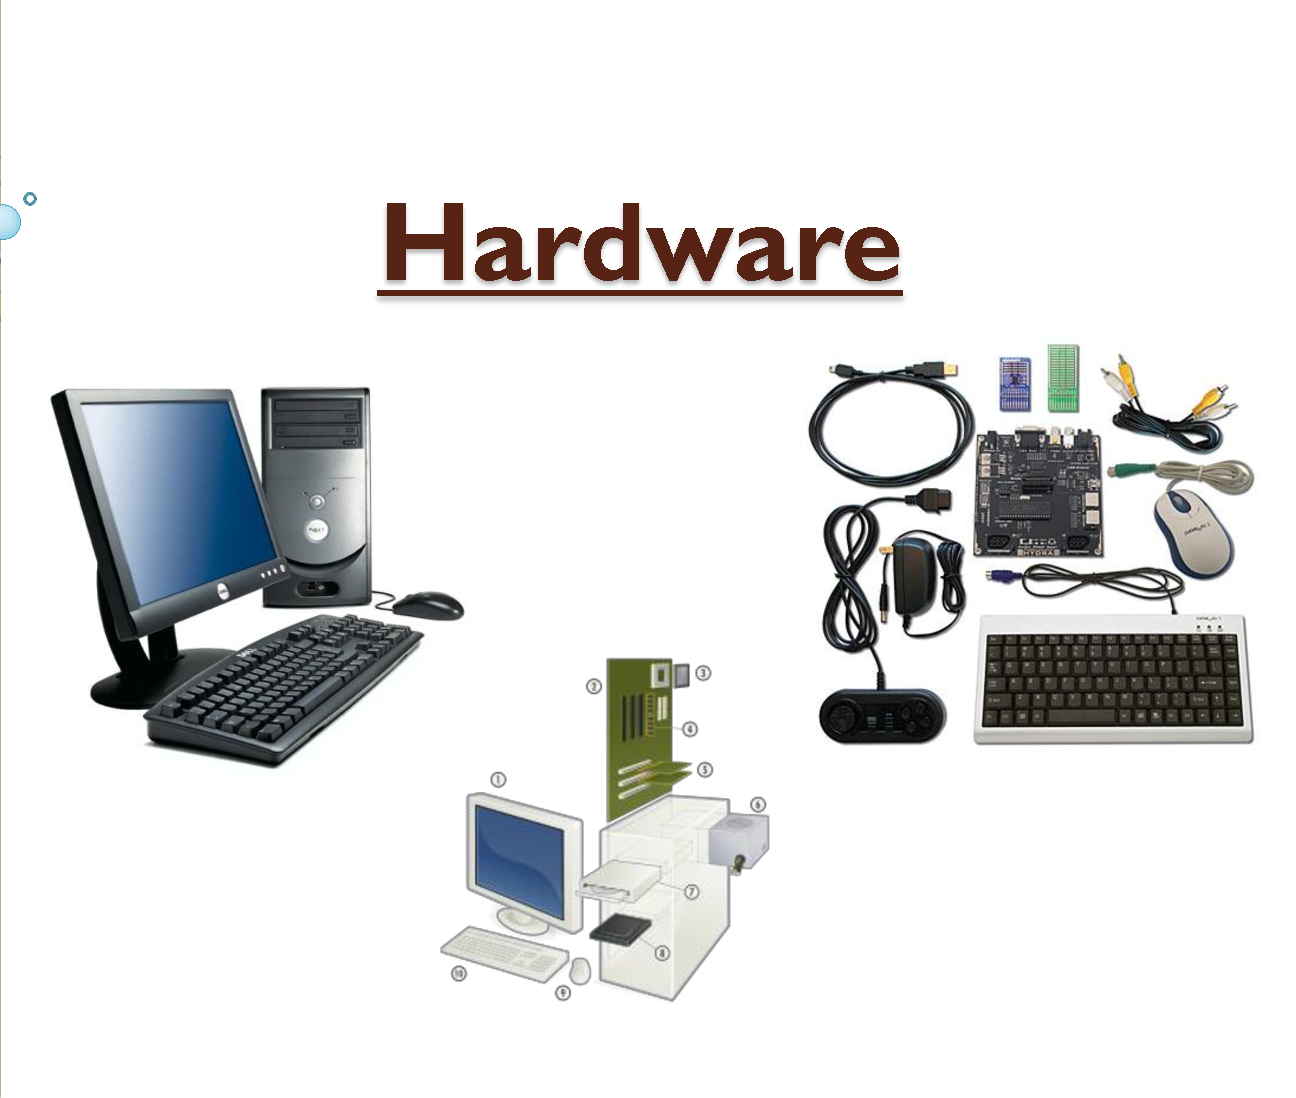 Hardware and software of a computer